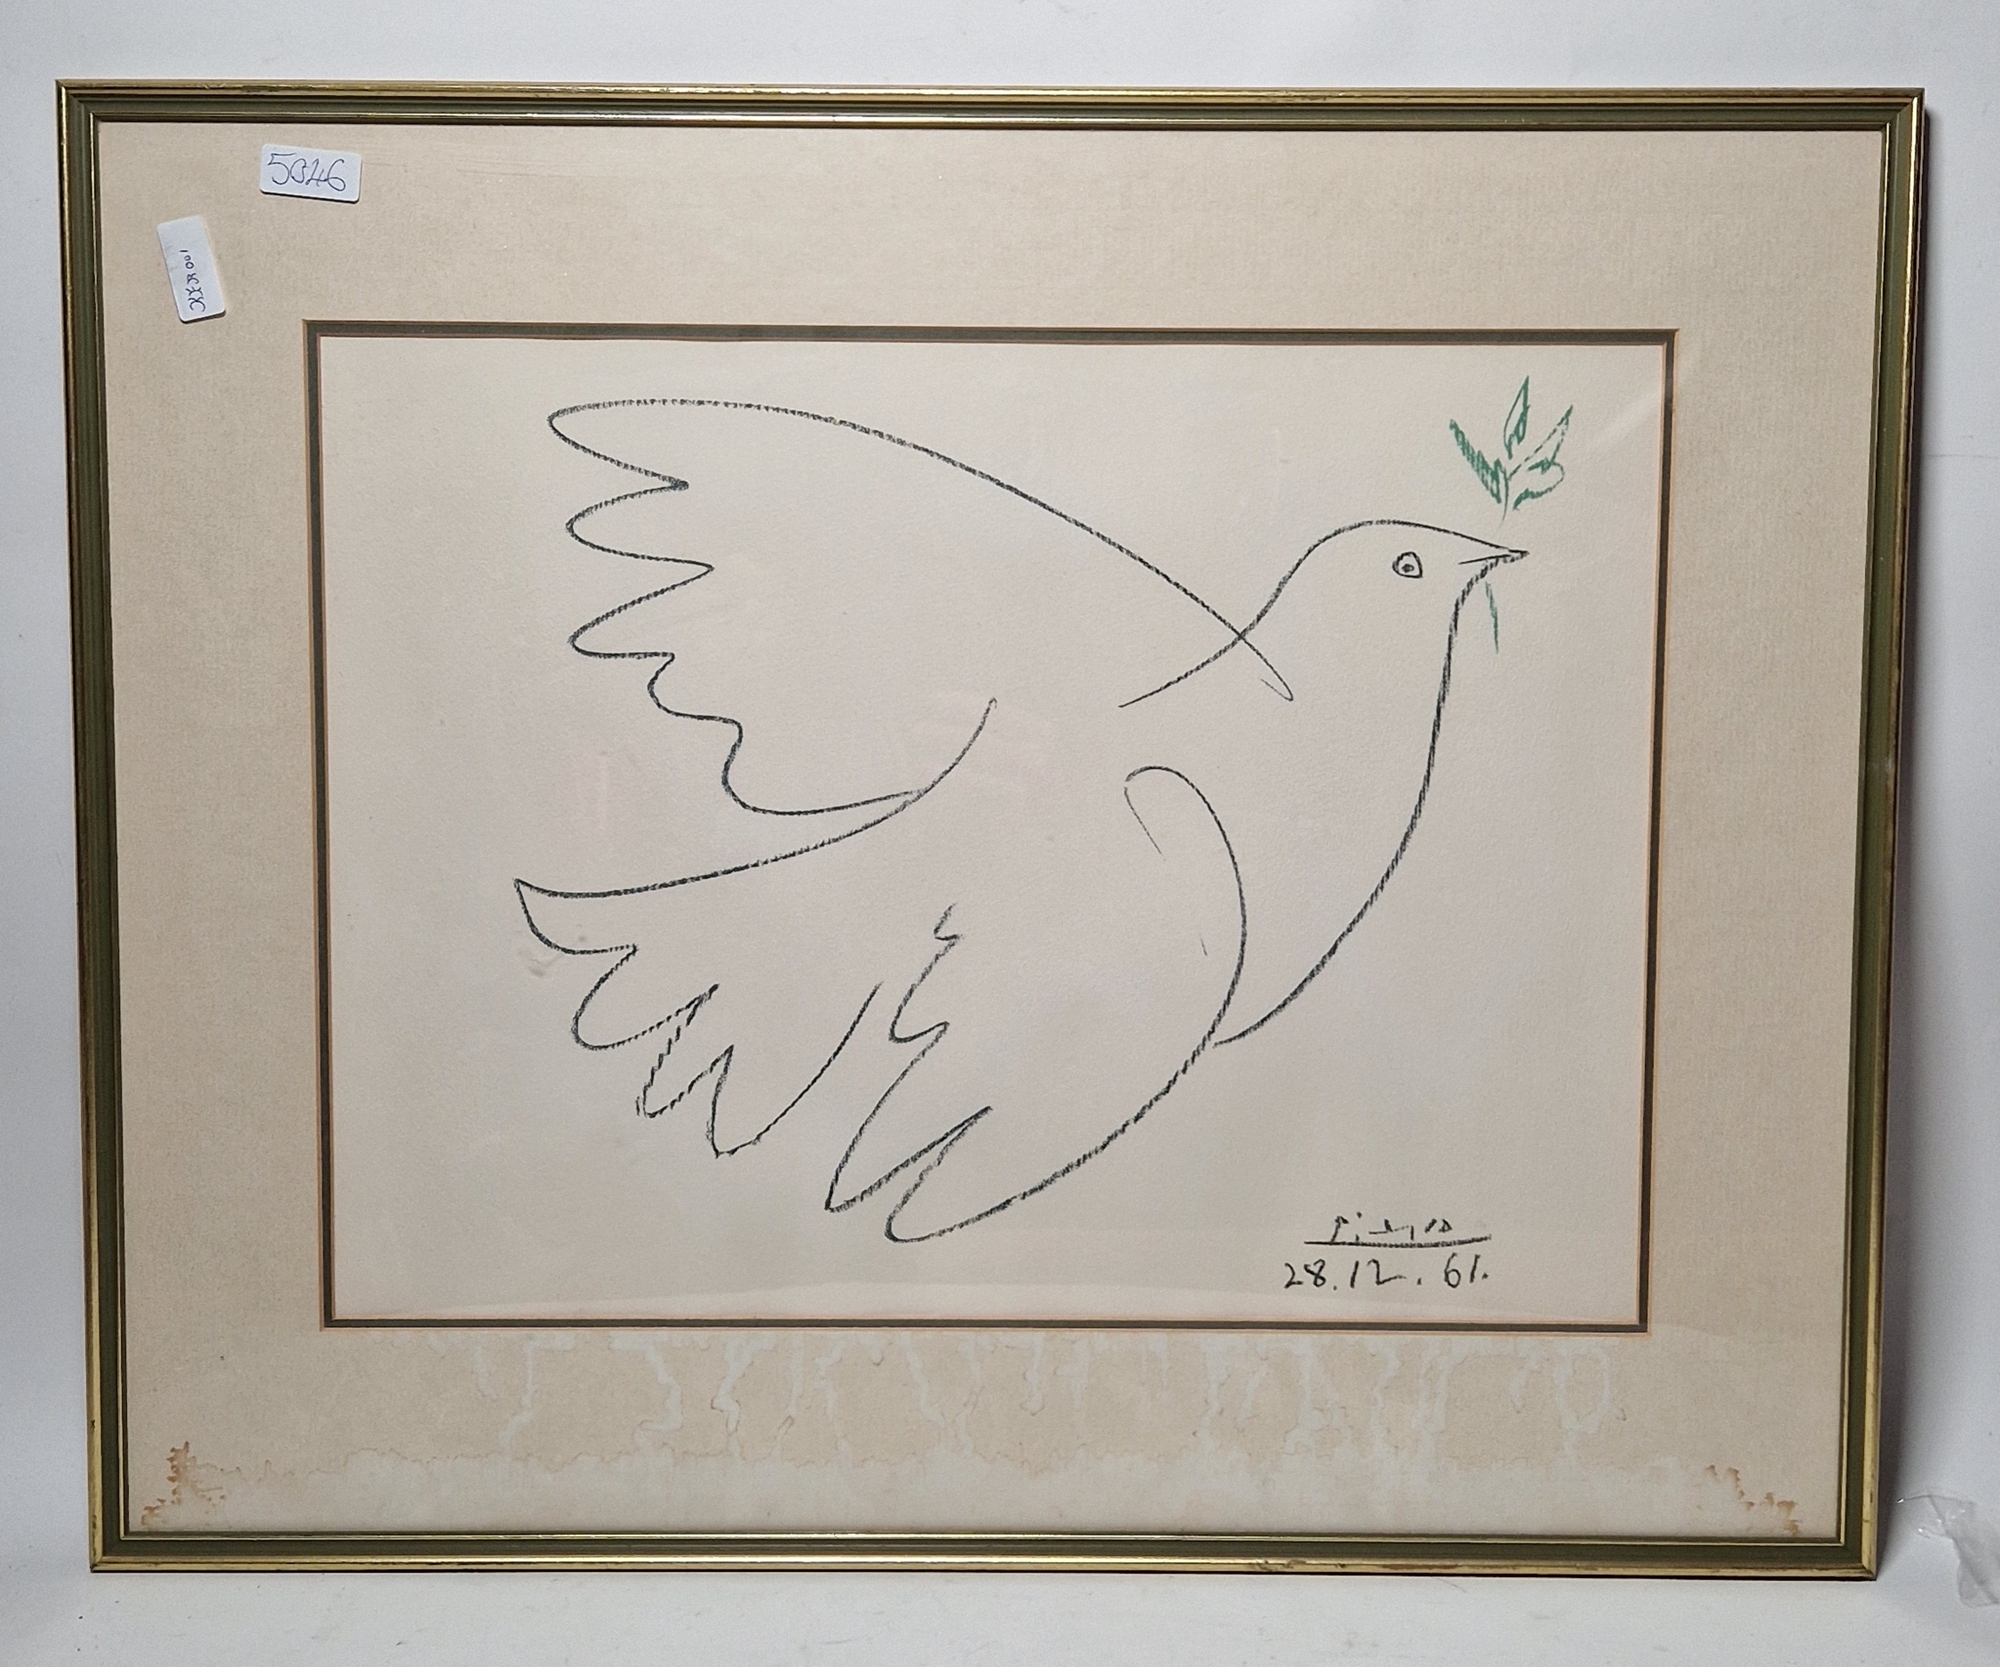 After Pablo Picasso (1881-1973) Offset lithograph "Dove of Peace", open edition, signed and dated - Image 2 of 2